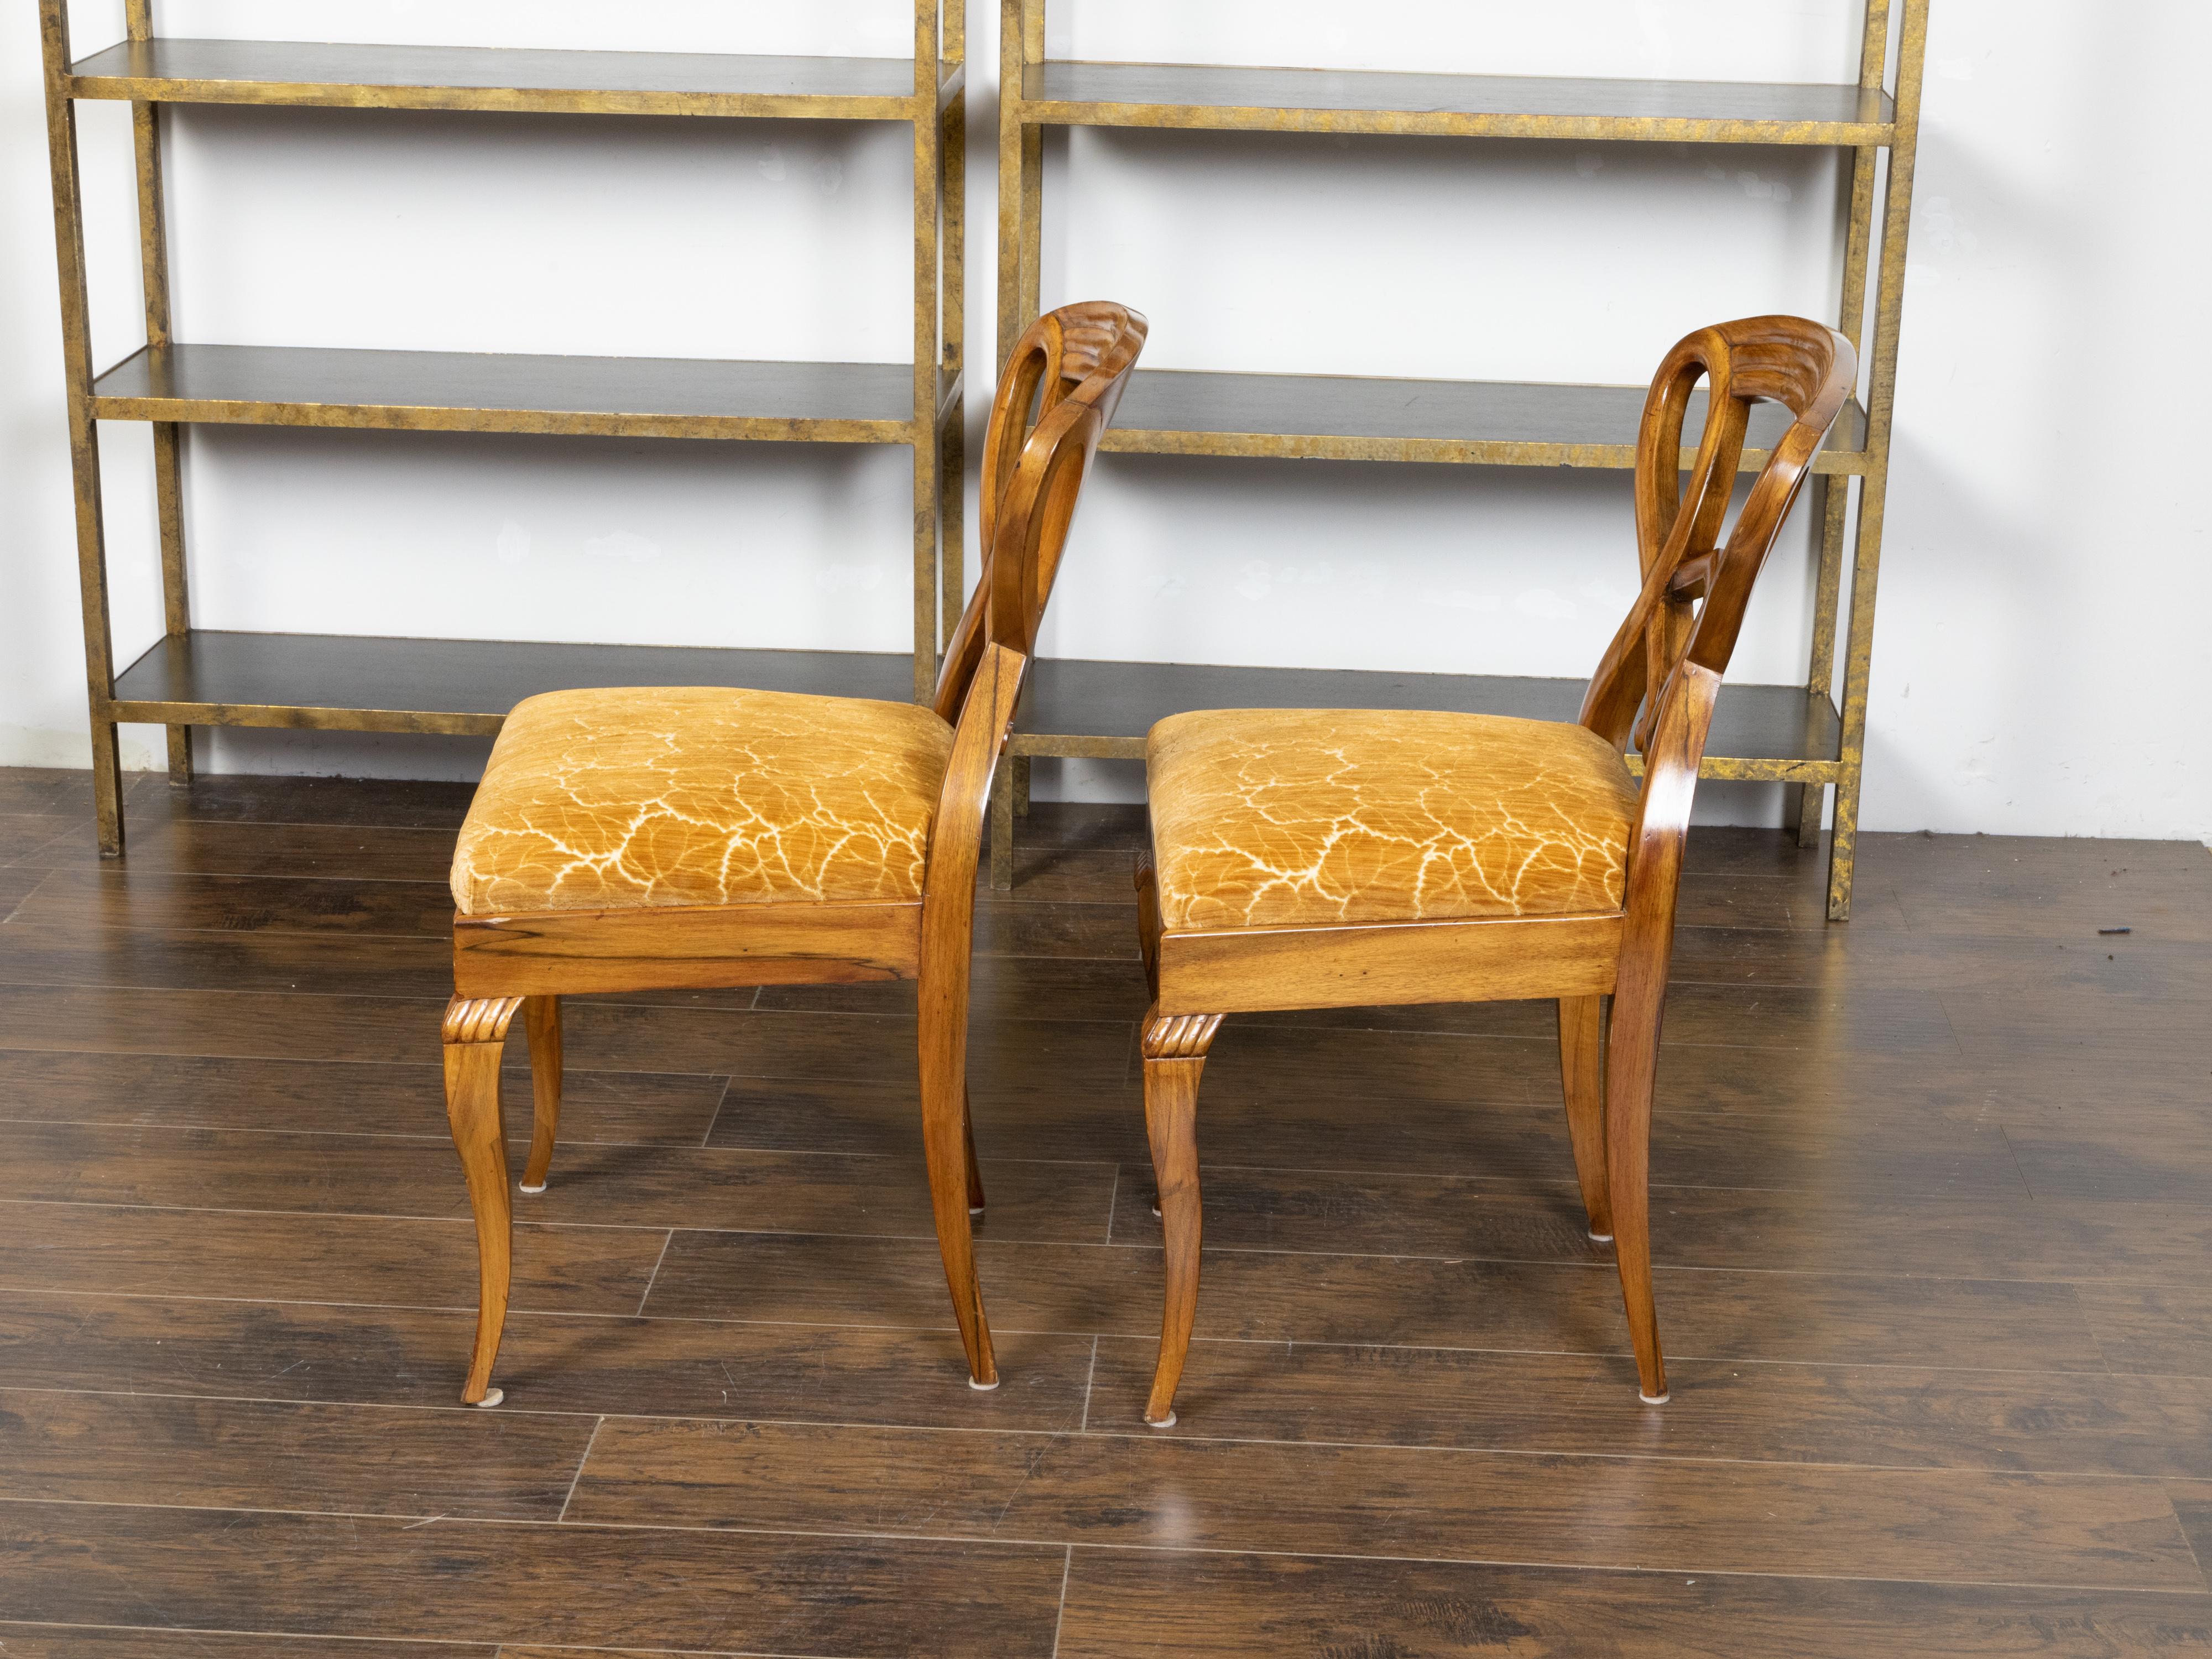 Upholstery Pair of Austrian Biedermeier 19th Century Side Chairs with Carved Open Backs For Sale